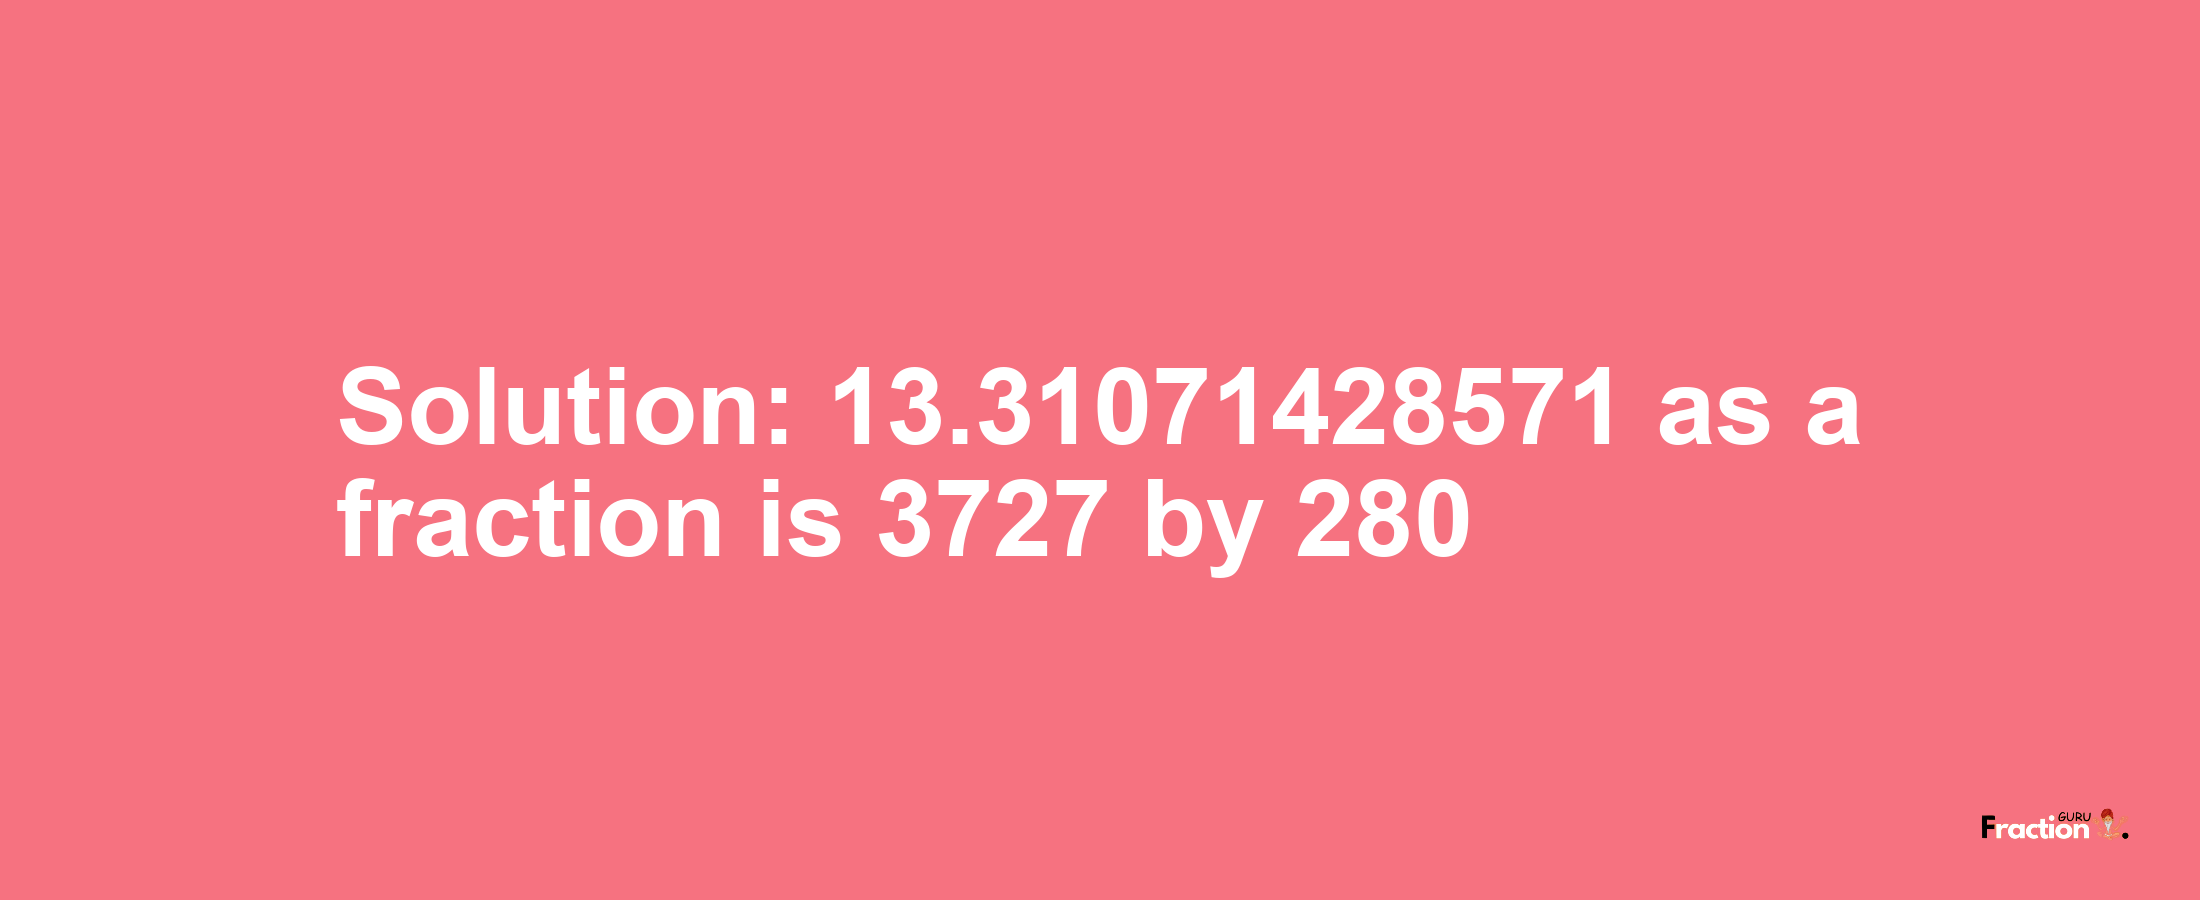 Solution:13.31071428571 as a fraction is 3727/280